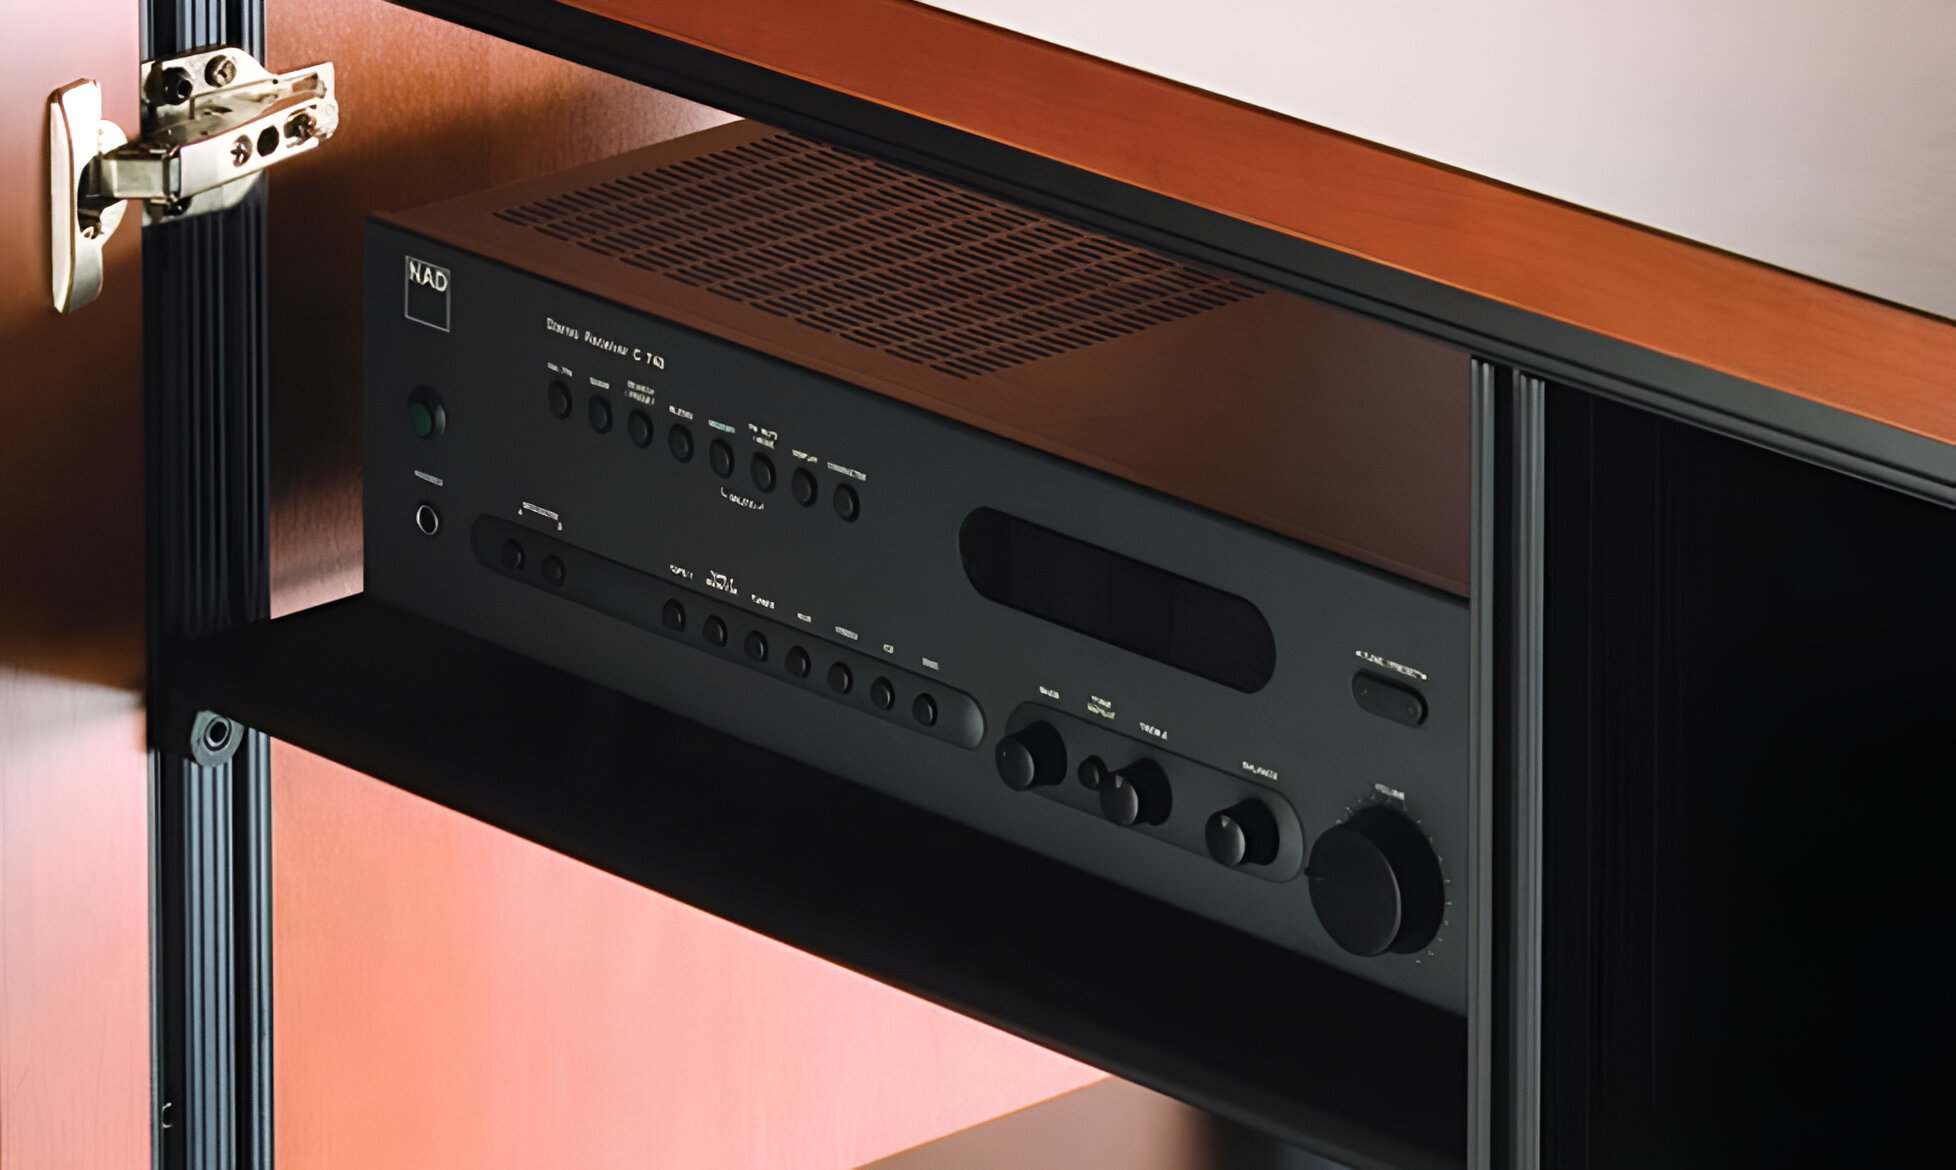 How To Control Your AV Receiver And Media Components In A Closet